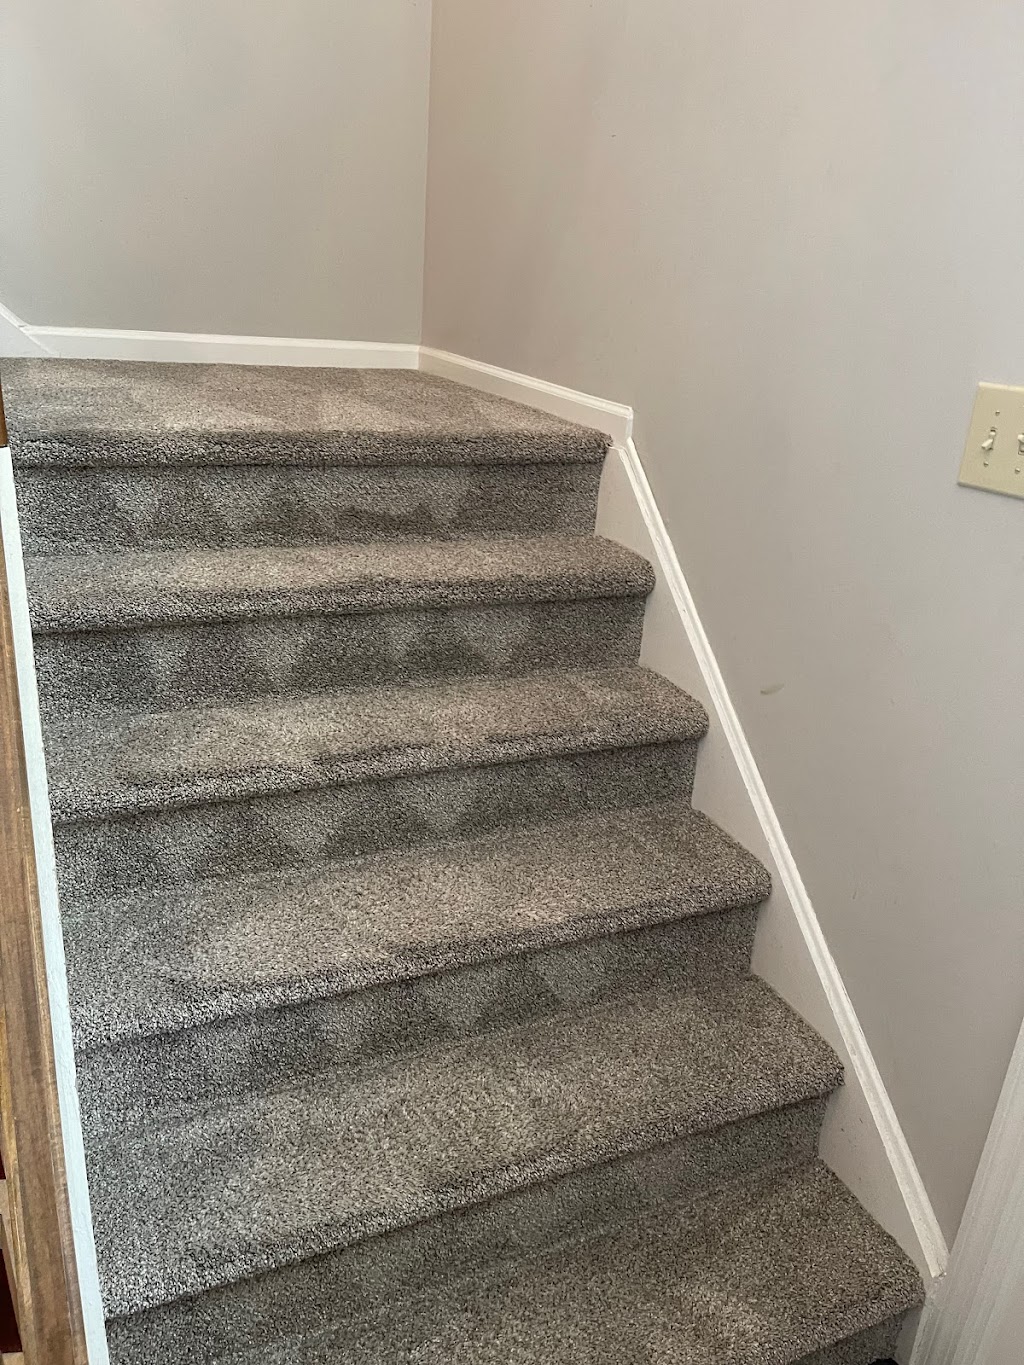 American Carpet Cleaners LLC | 7 Westerly Dr, Sicklerville, NJ 08081 | Phone: (856) 728-5005